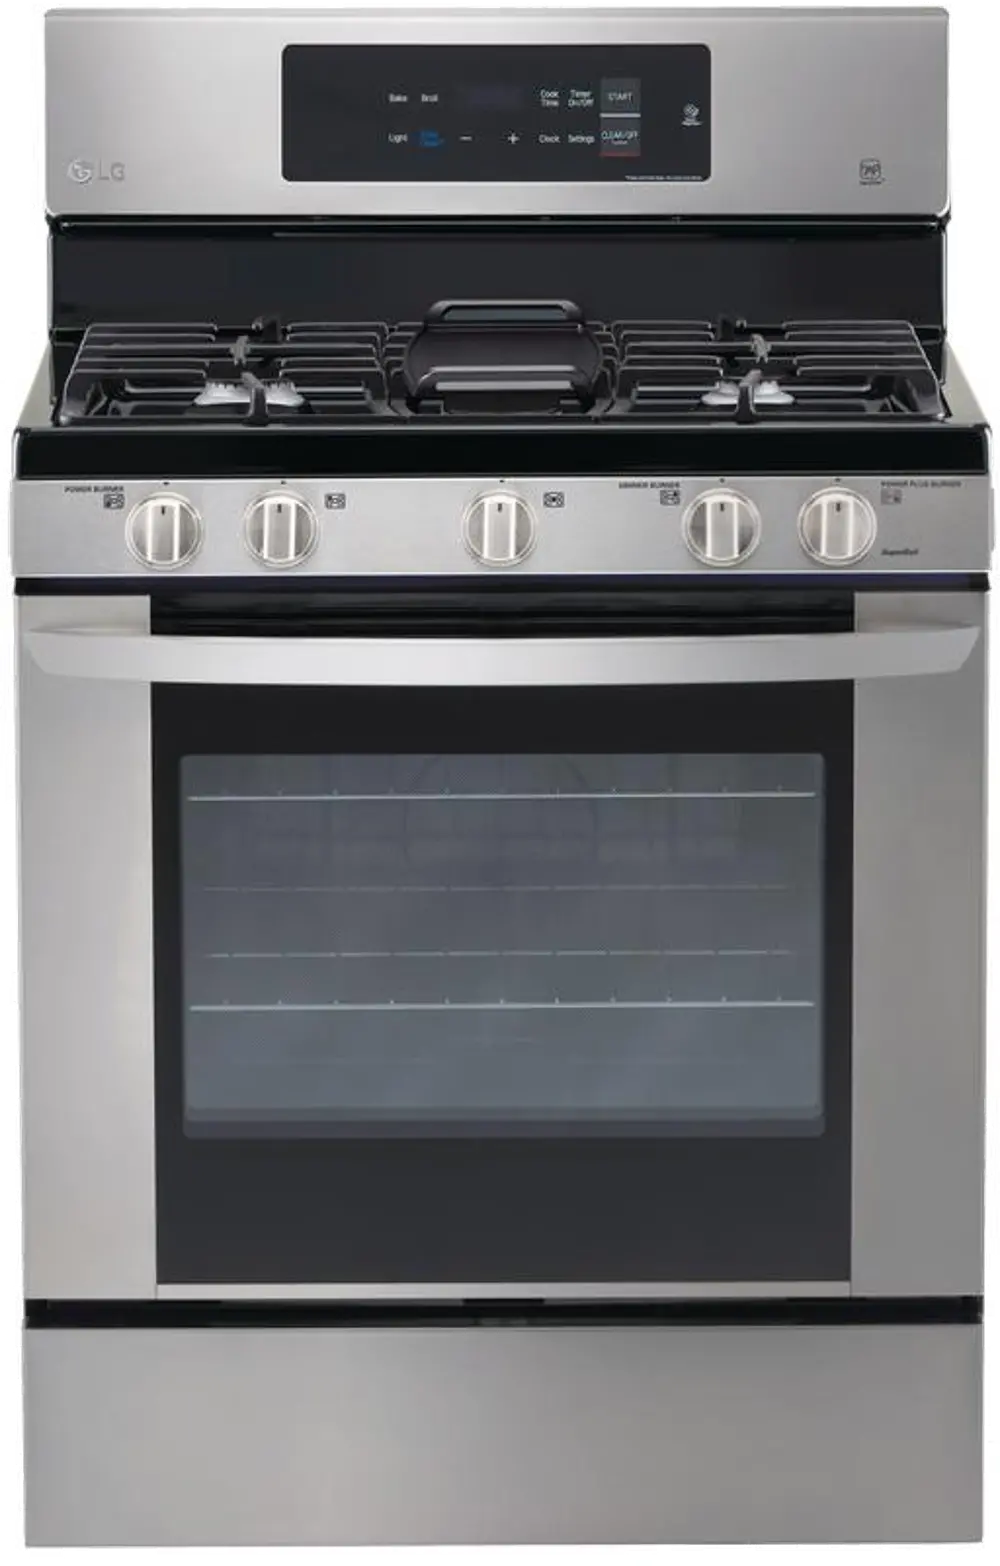 LRG3061ST LG 5.4 cu. ft. Gas Range with EasyClean - Stainless Steel-1